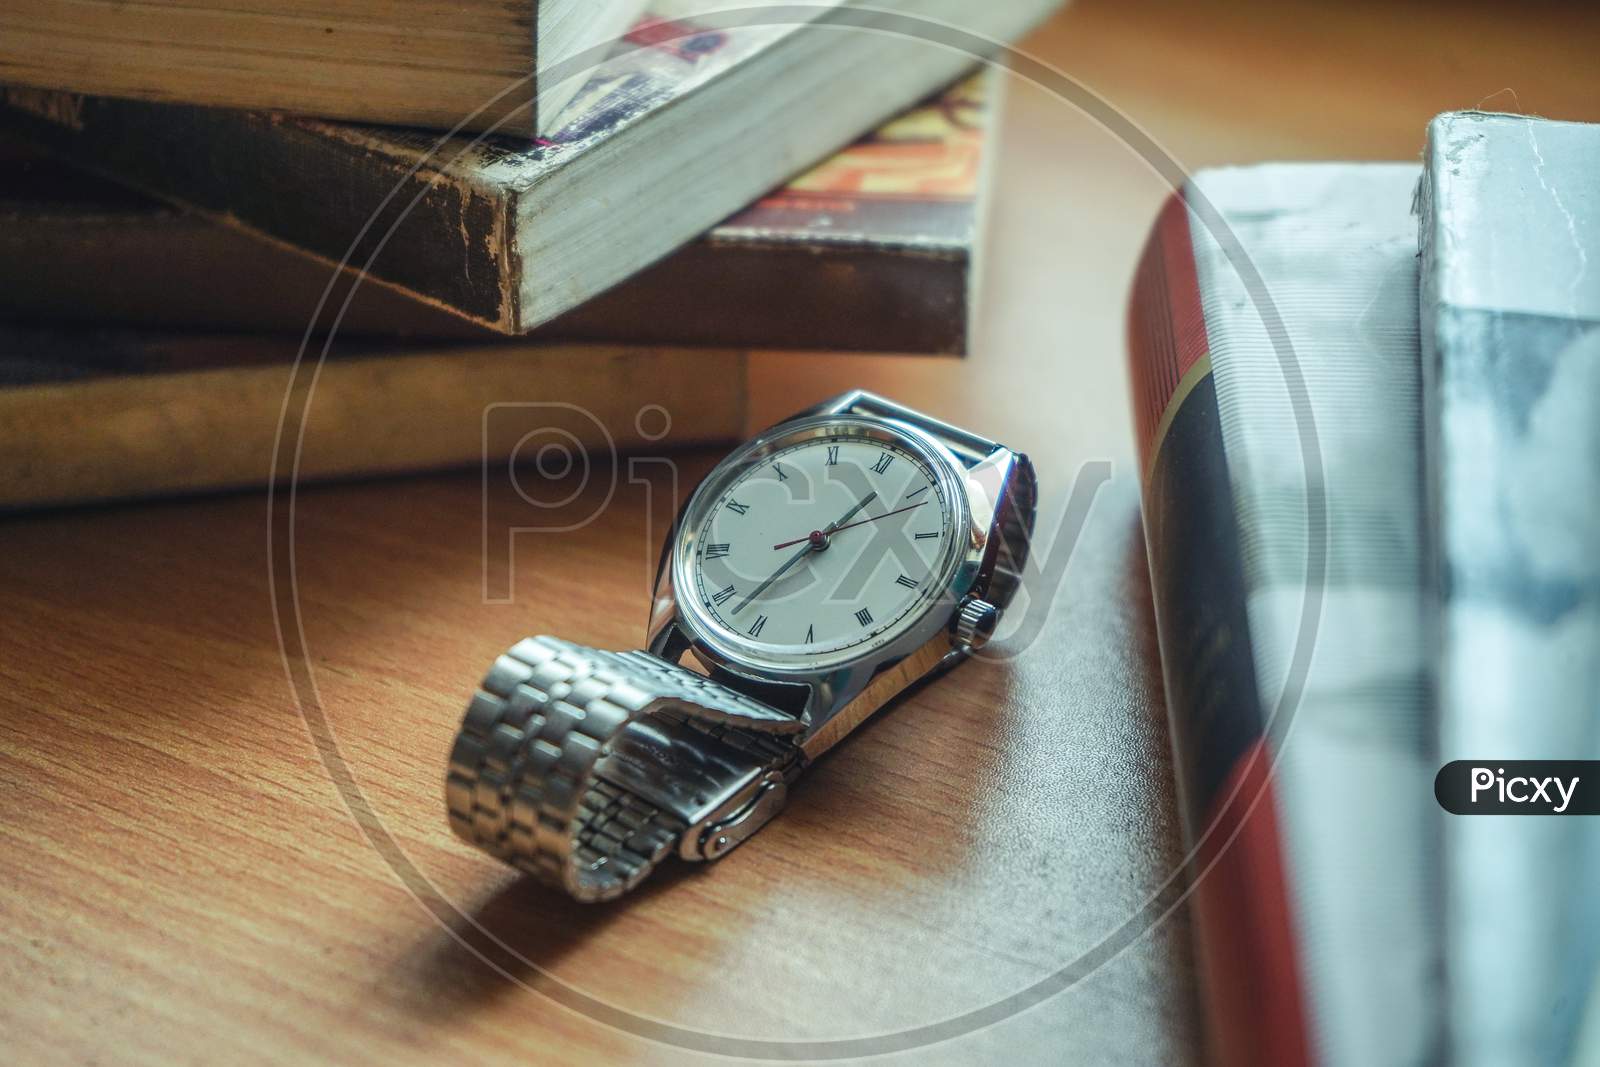 Old Vintage Watch And Some Books On A Table